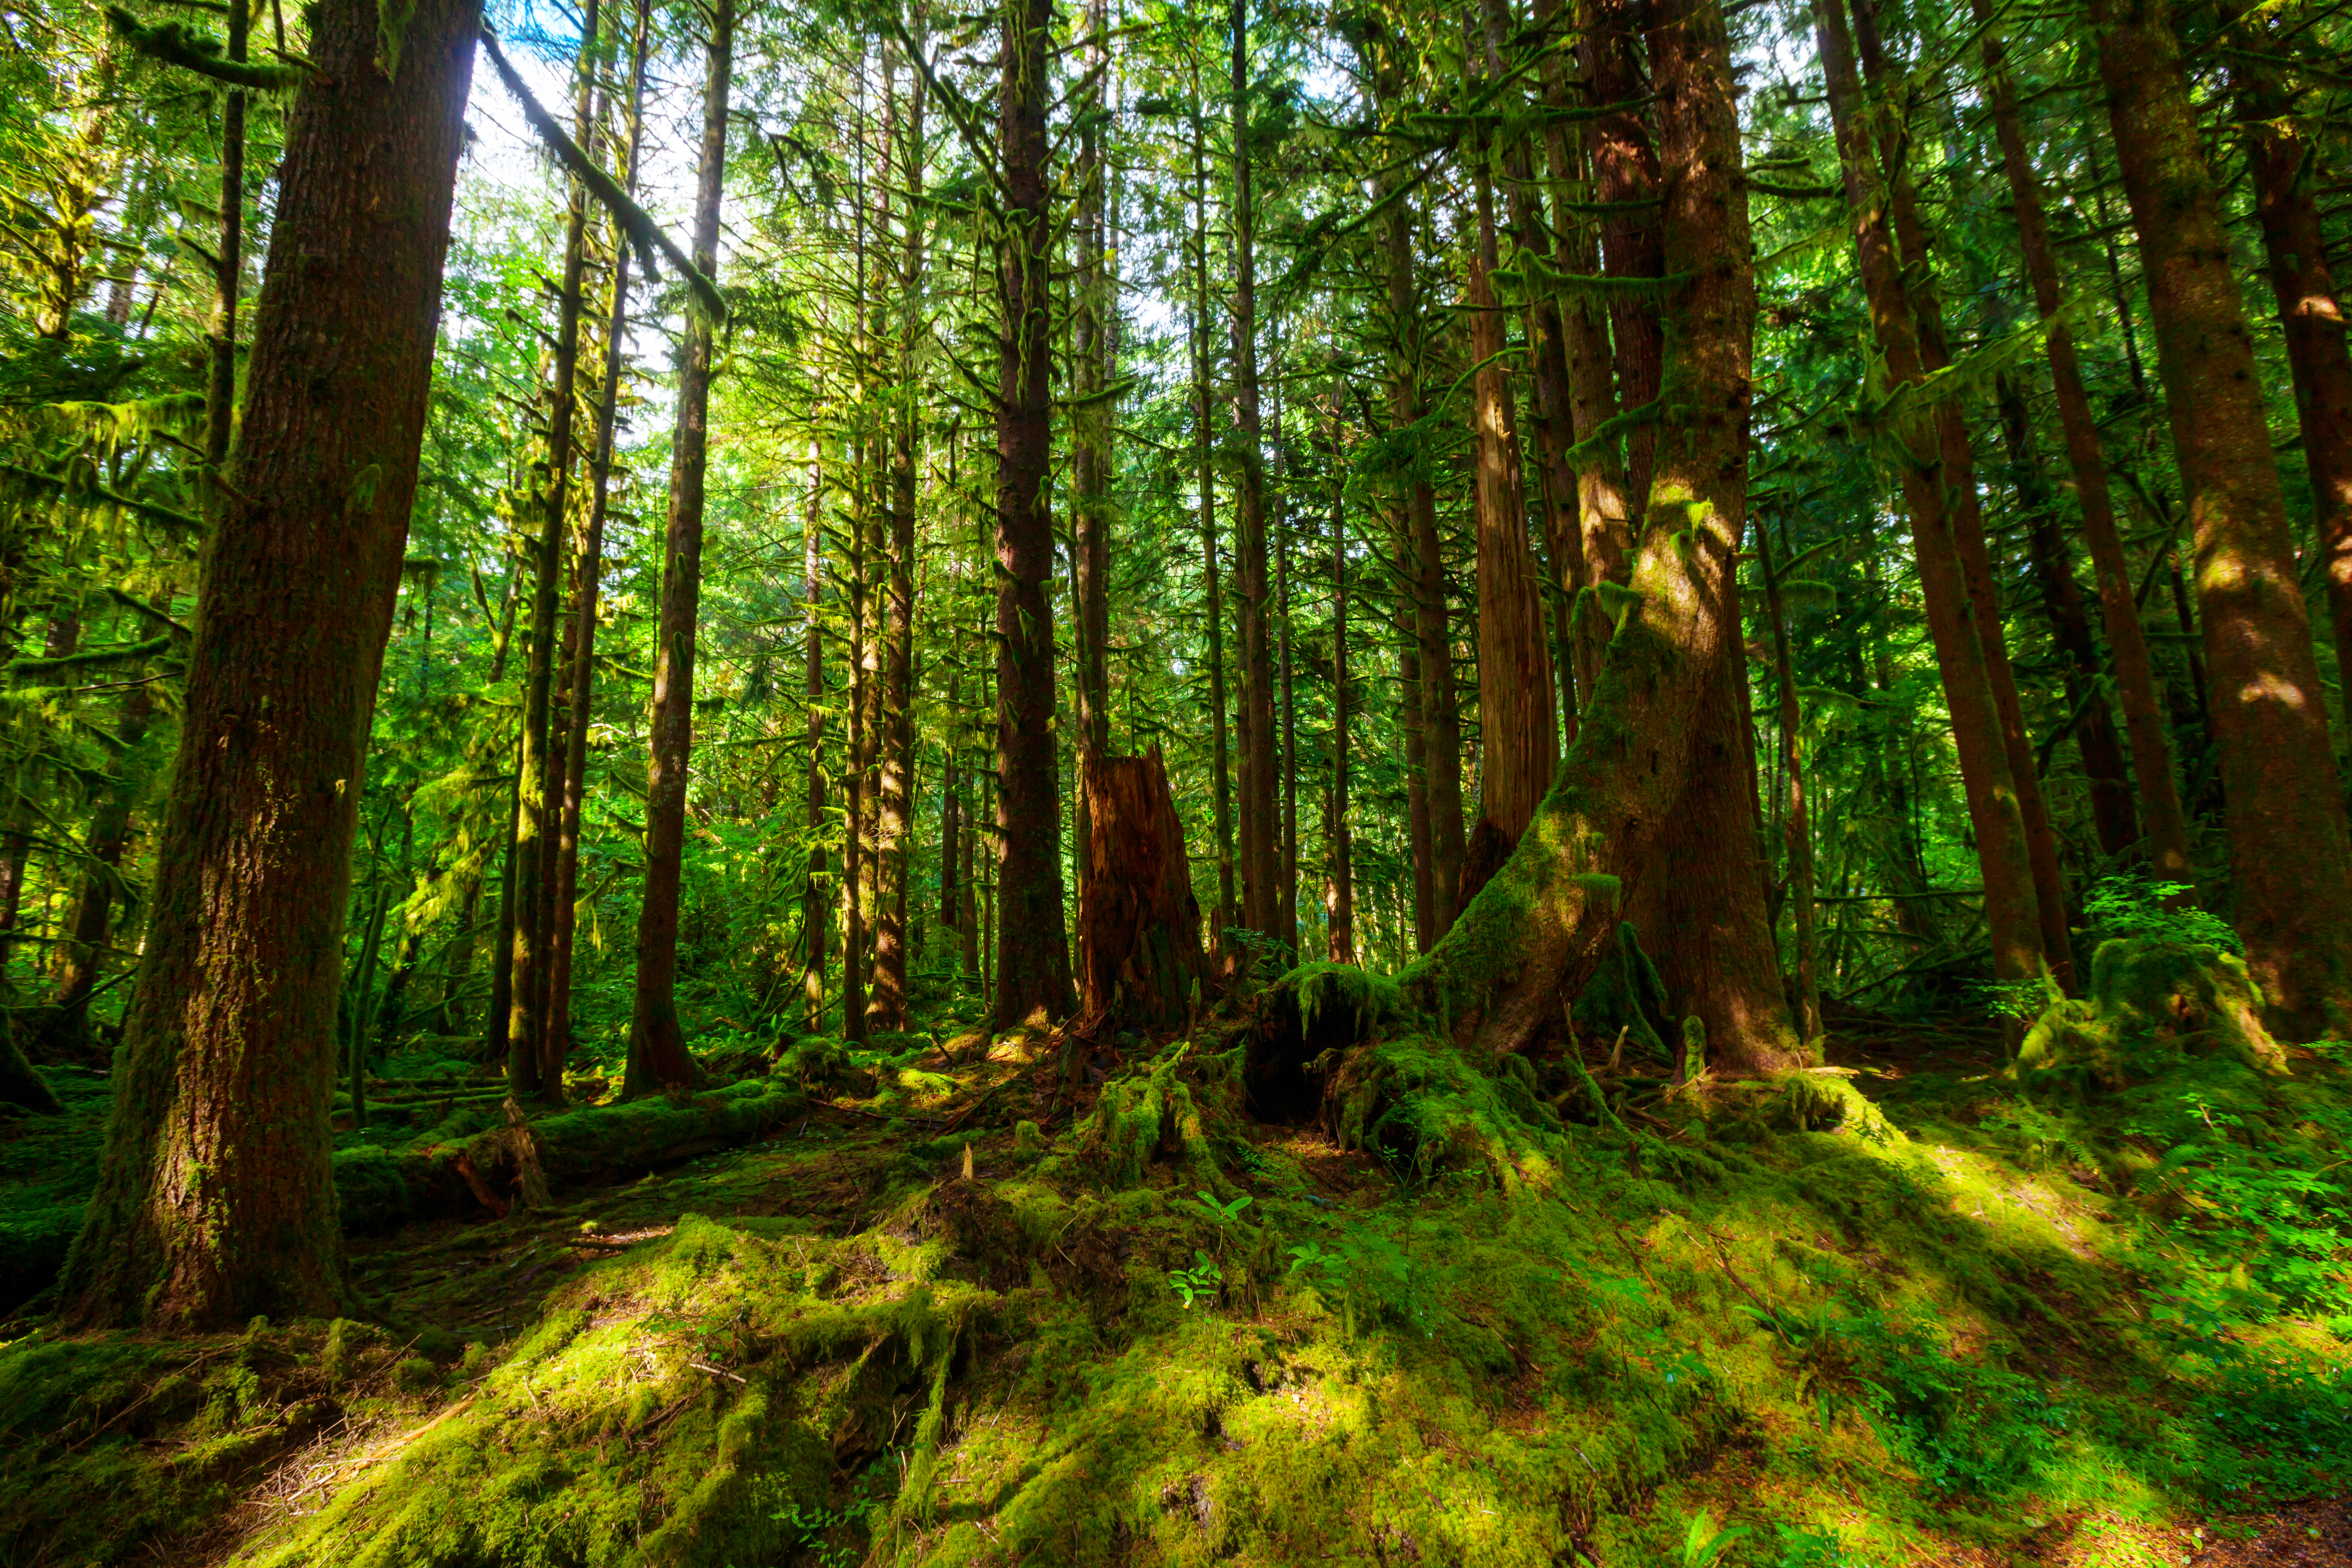 Mature and old-growth forests act as formidable carbon storage systems, sequestering carbon dioxide from the atmosphere and mitigating the impacts of climate change. Image Credit: Galyna Andrushko, Envato Elements.